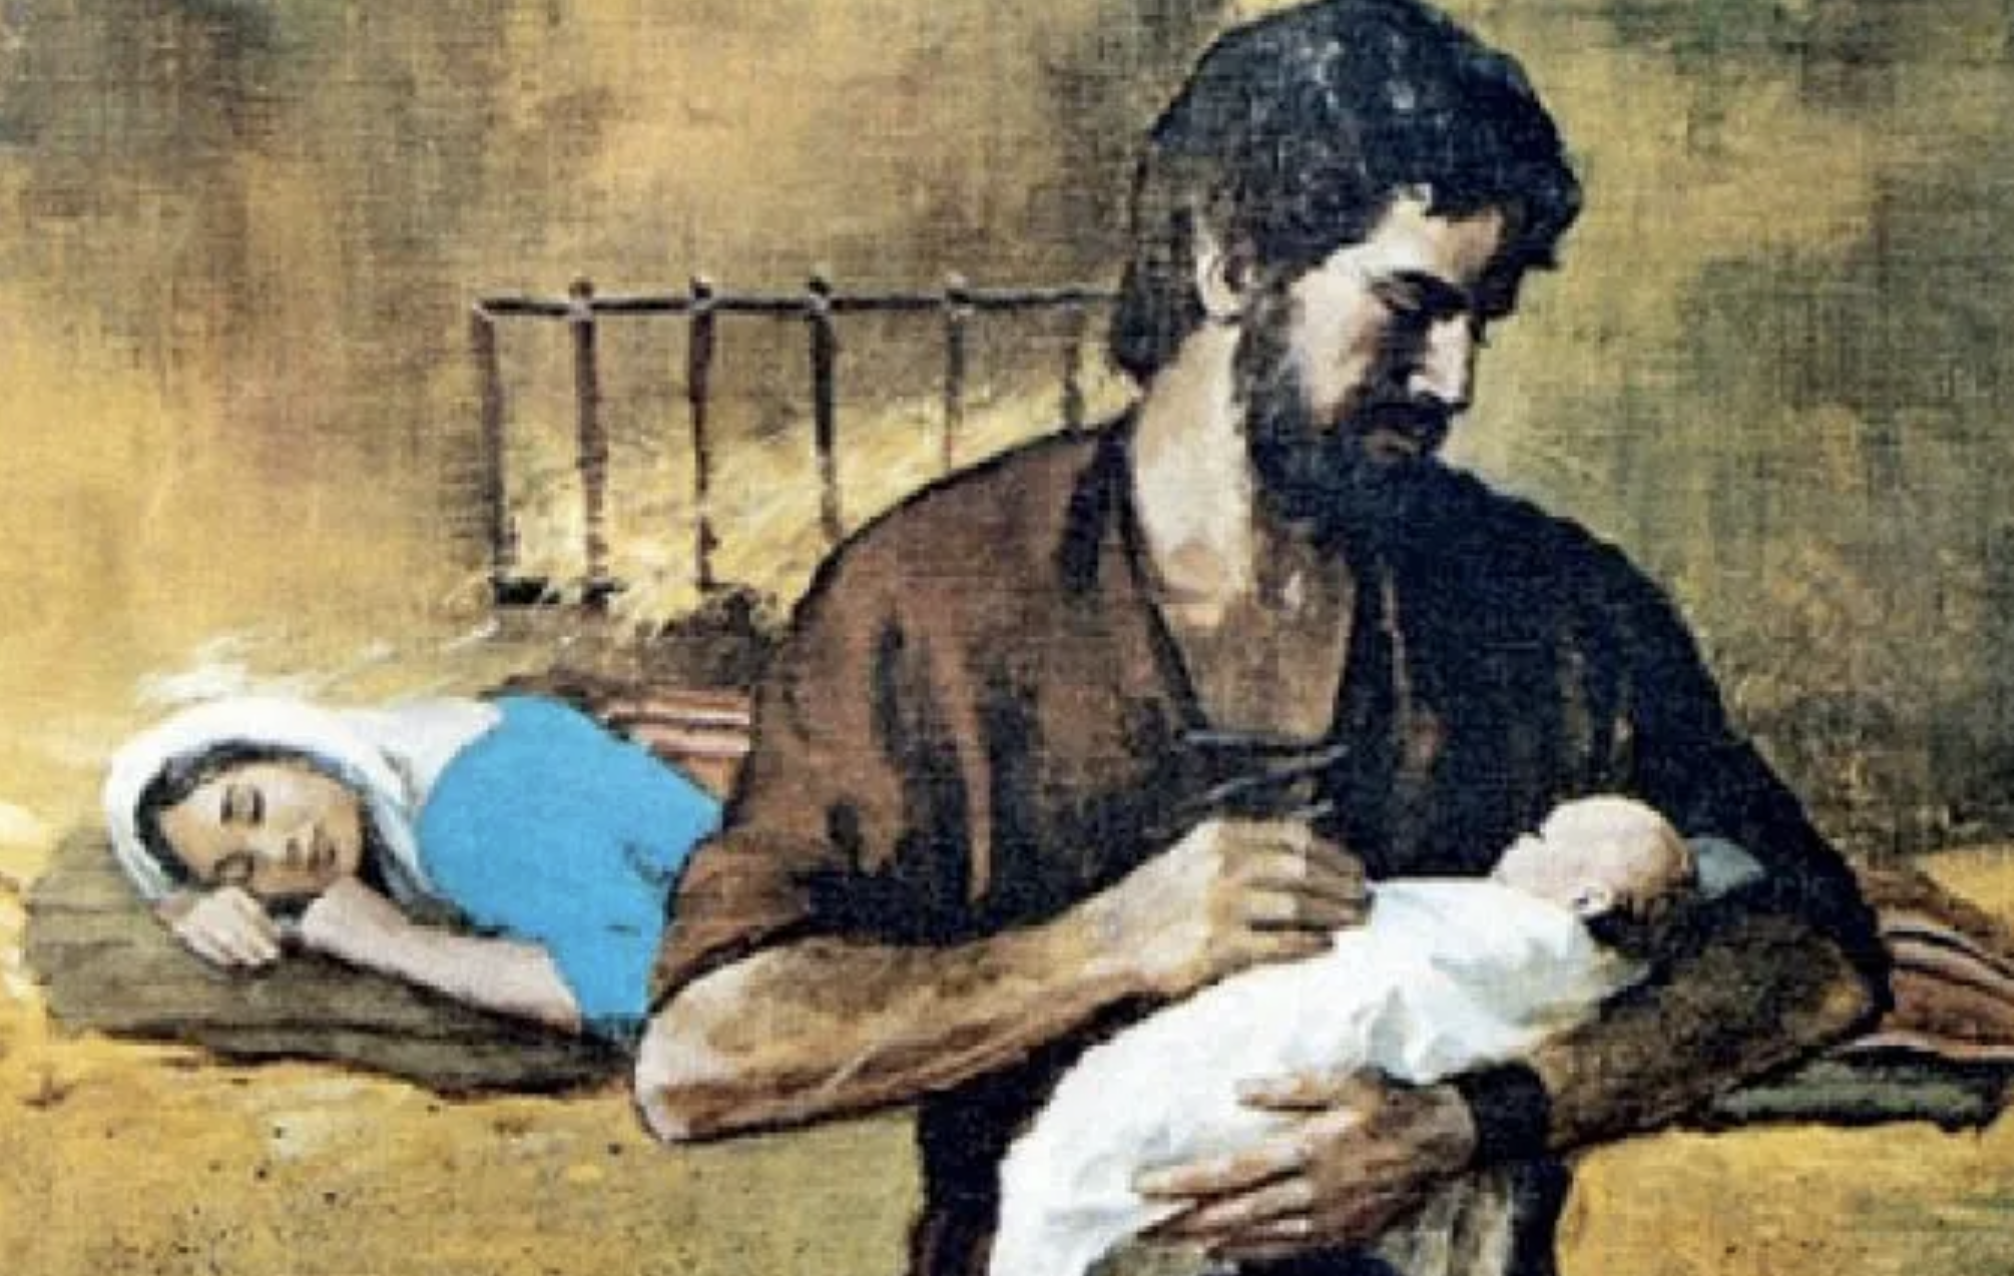 Joseph holds th new baby Jesus in his arms whilst Mary, dressed in blue, lies exhausted on the floor behind